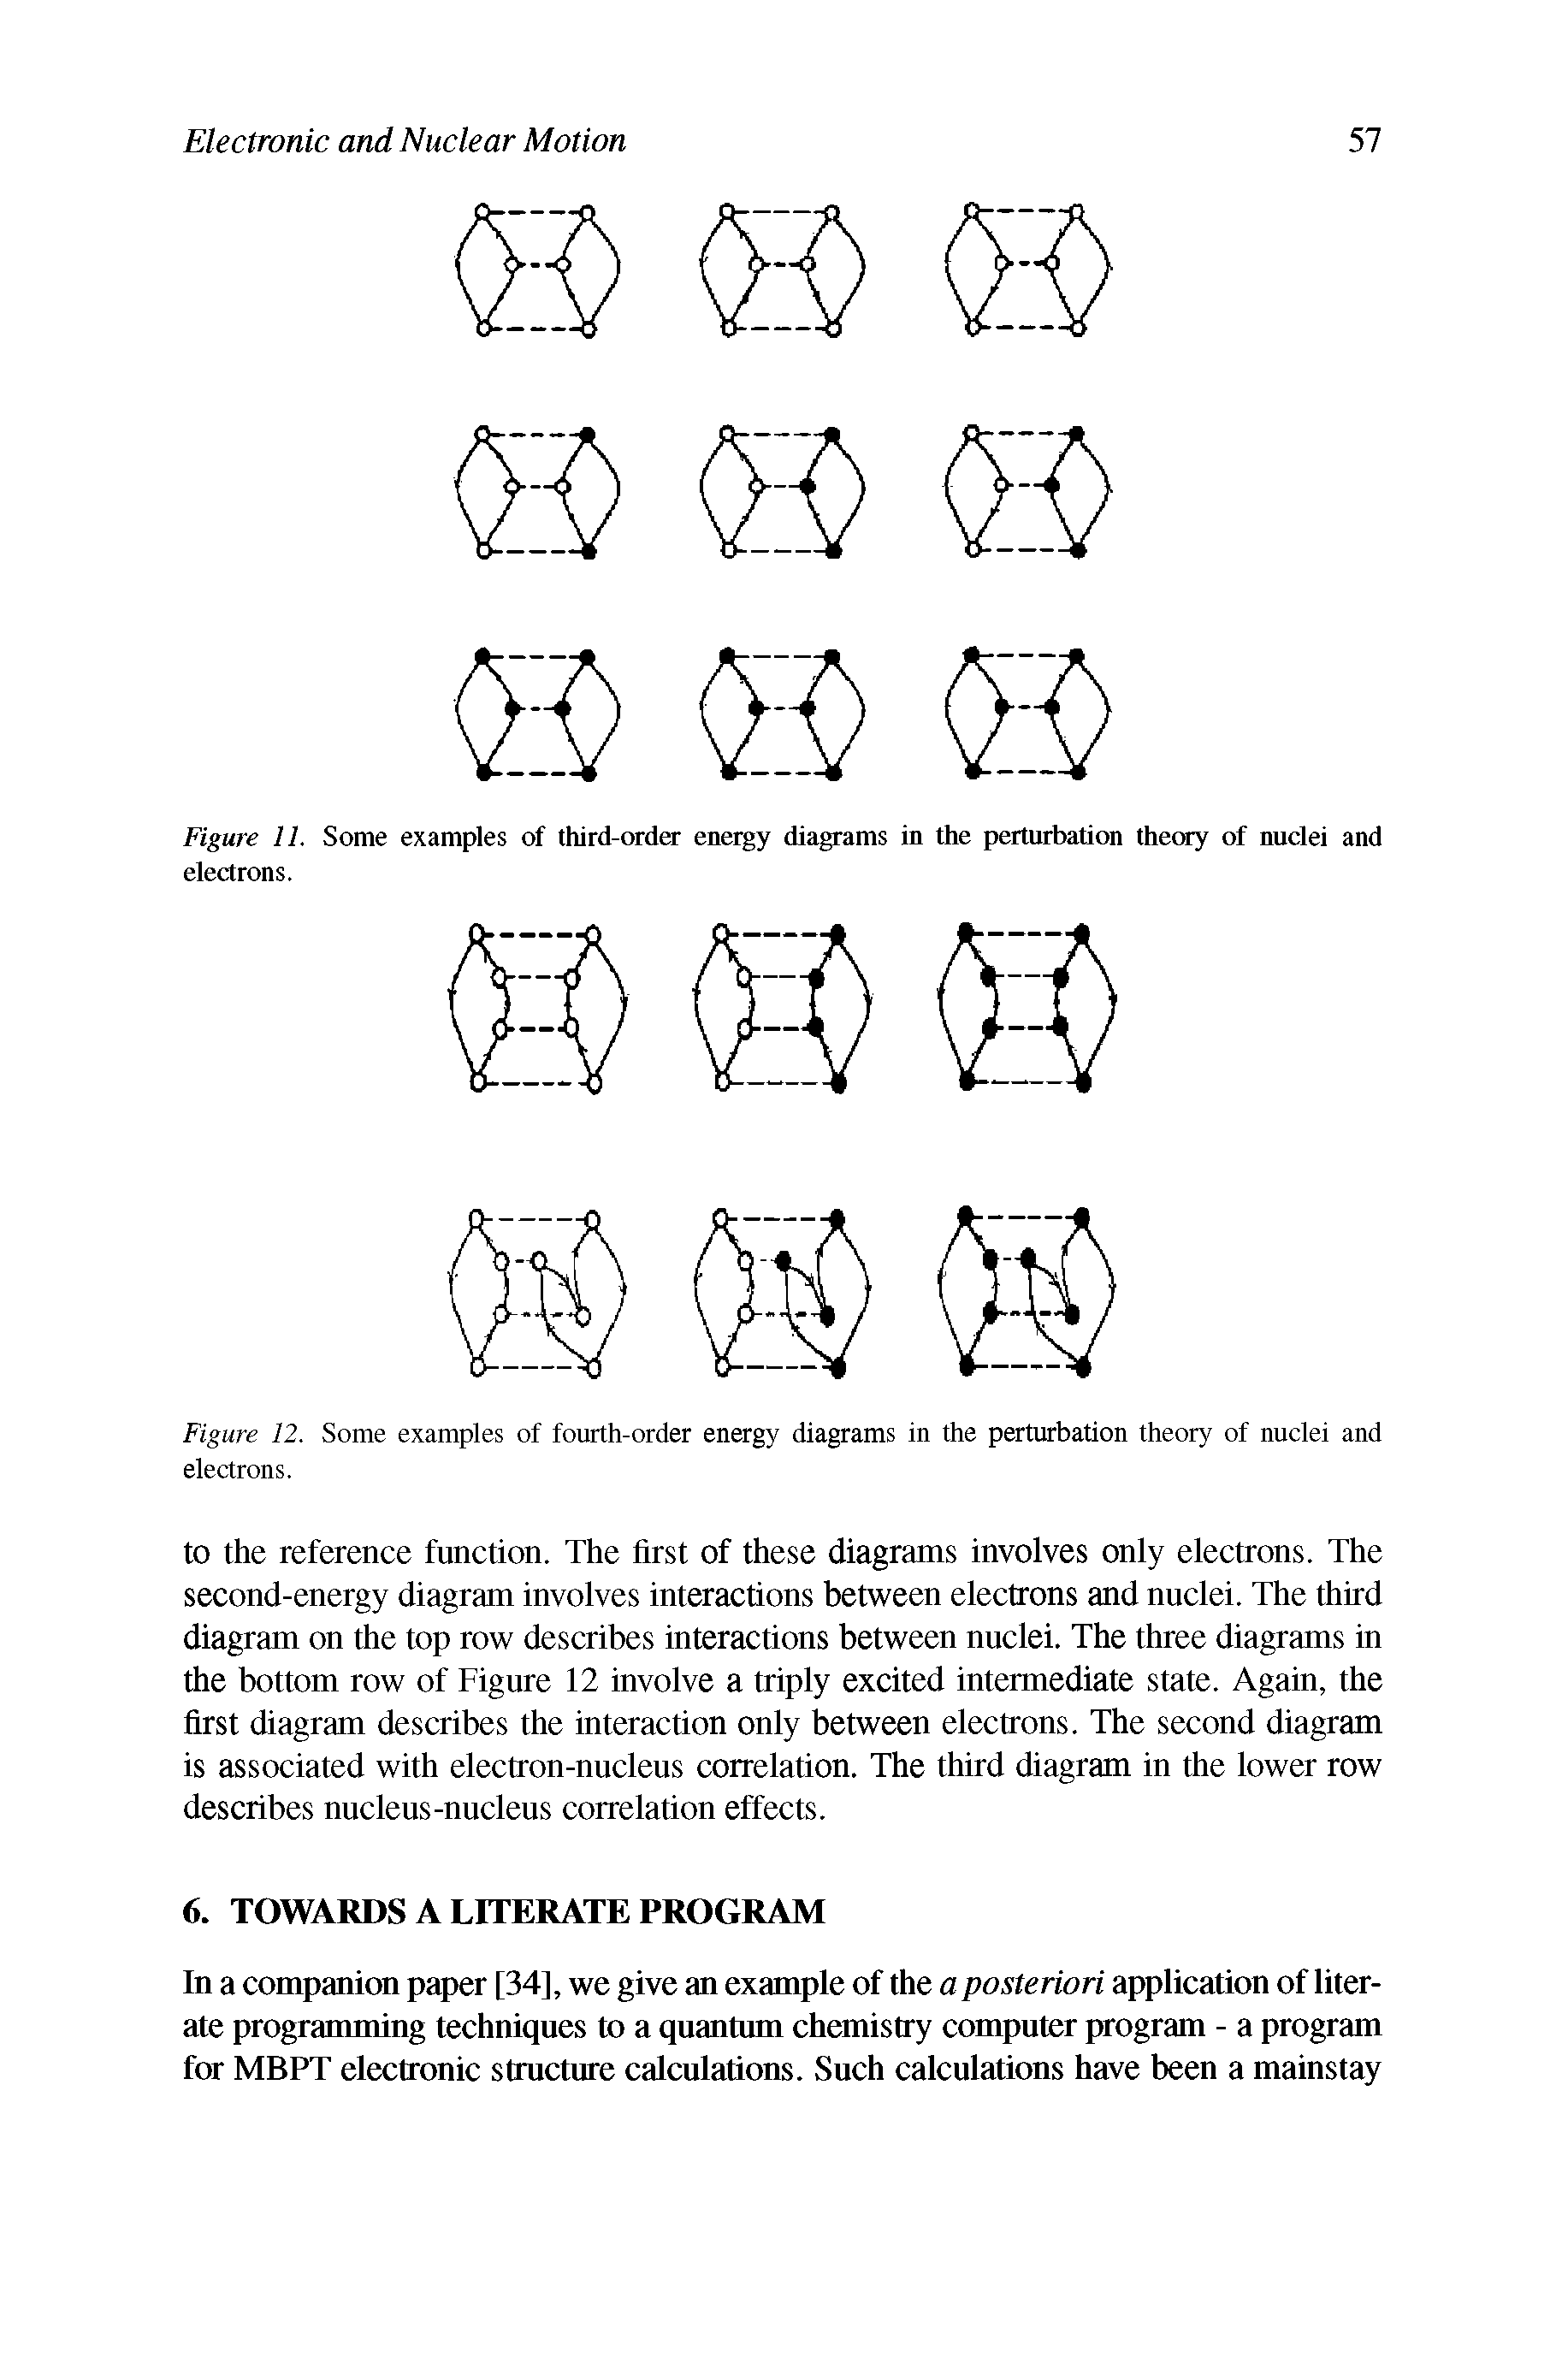 Figure 12. Some examples of fourth-order energy diagrams in the perturbation theory of nuclei and electrons.